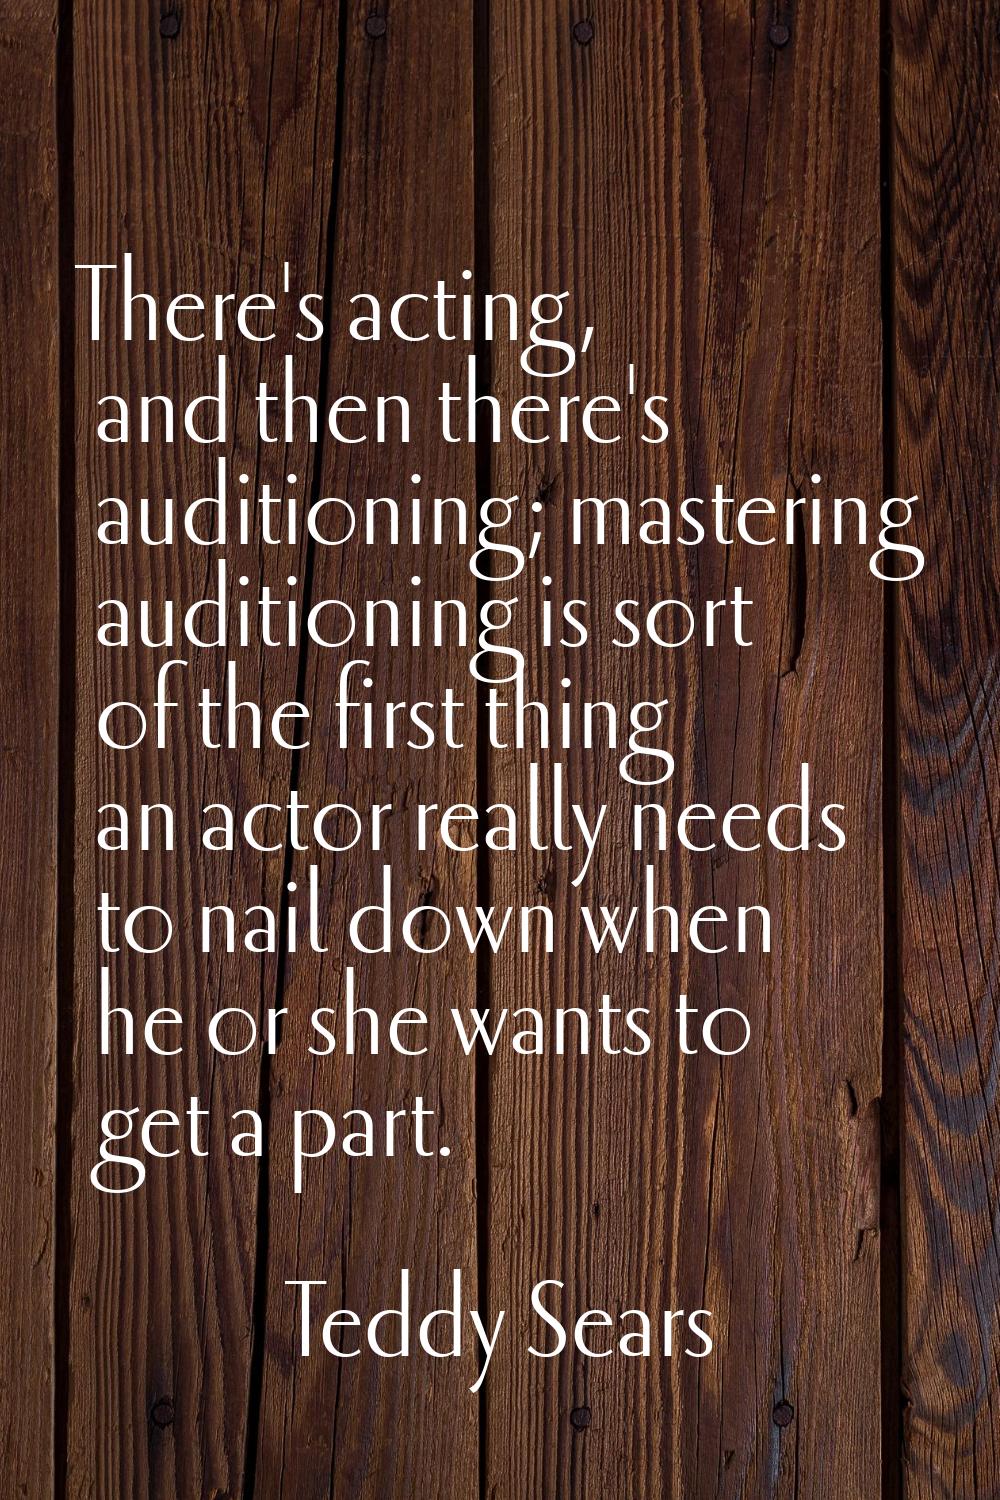 There's acting, and then there's auditioning; mastering auditioning is sort of the first thing an a